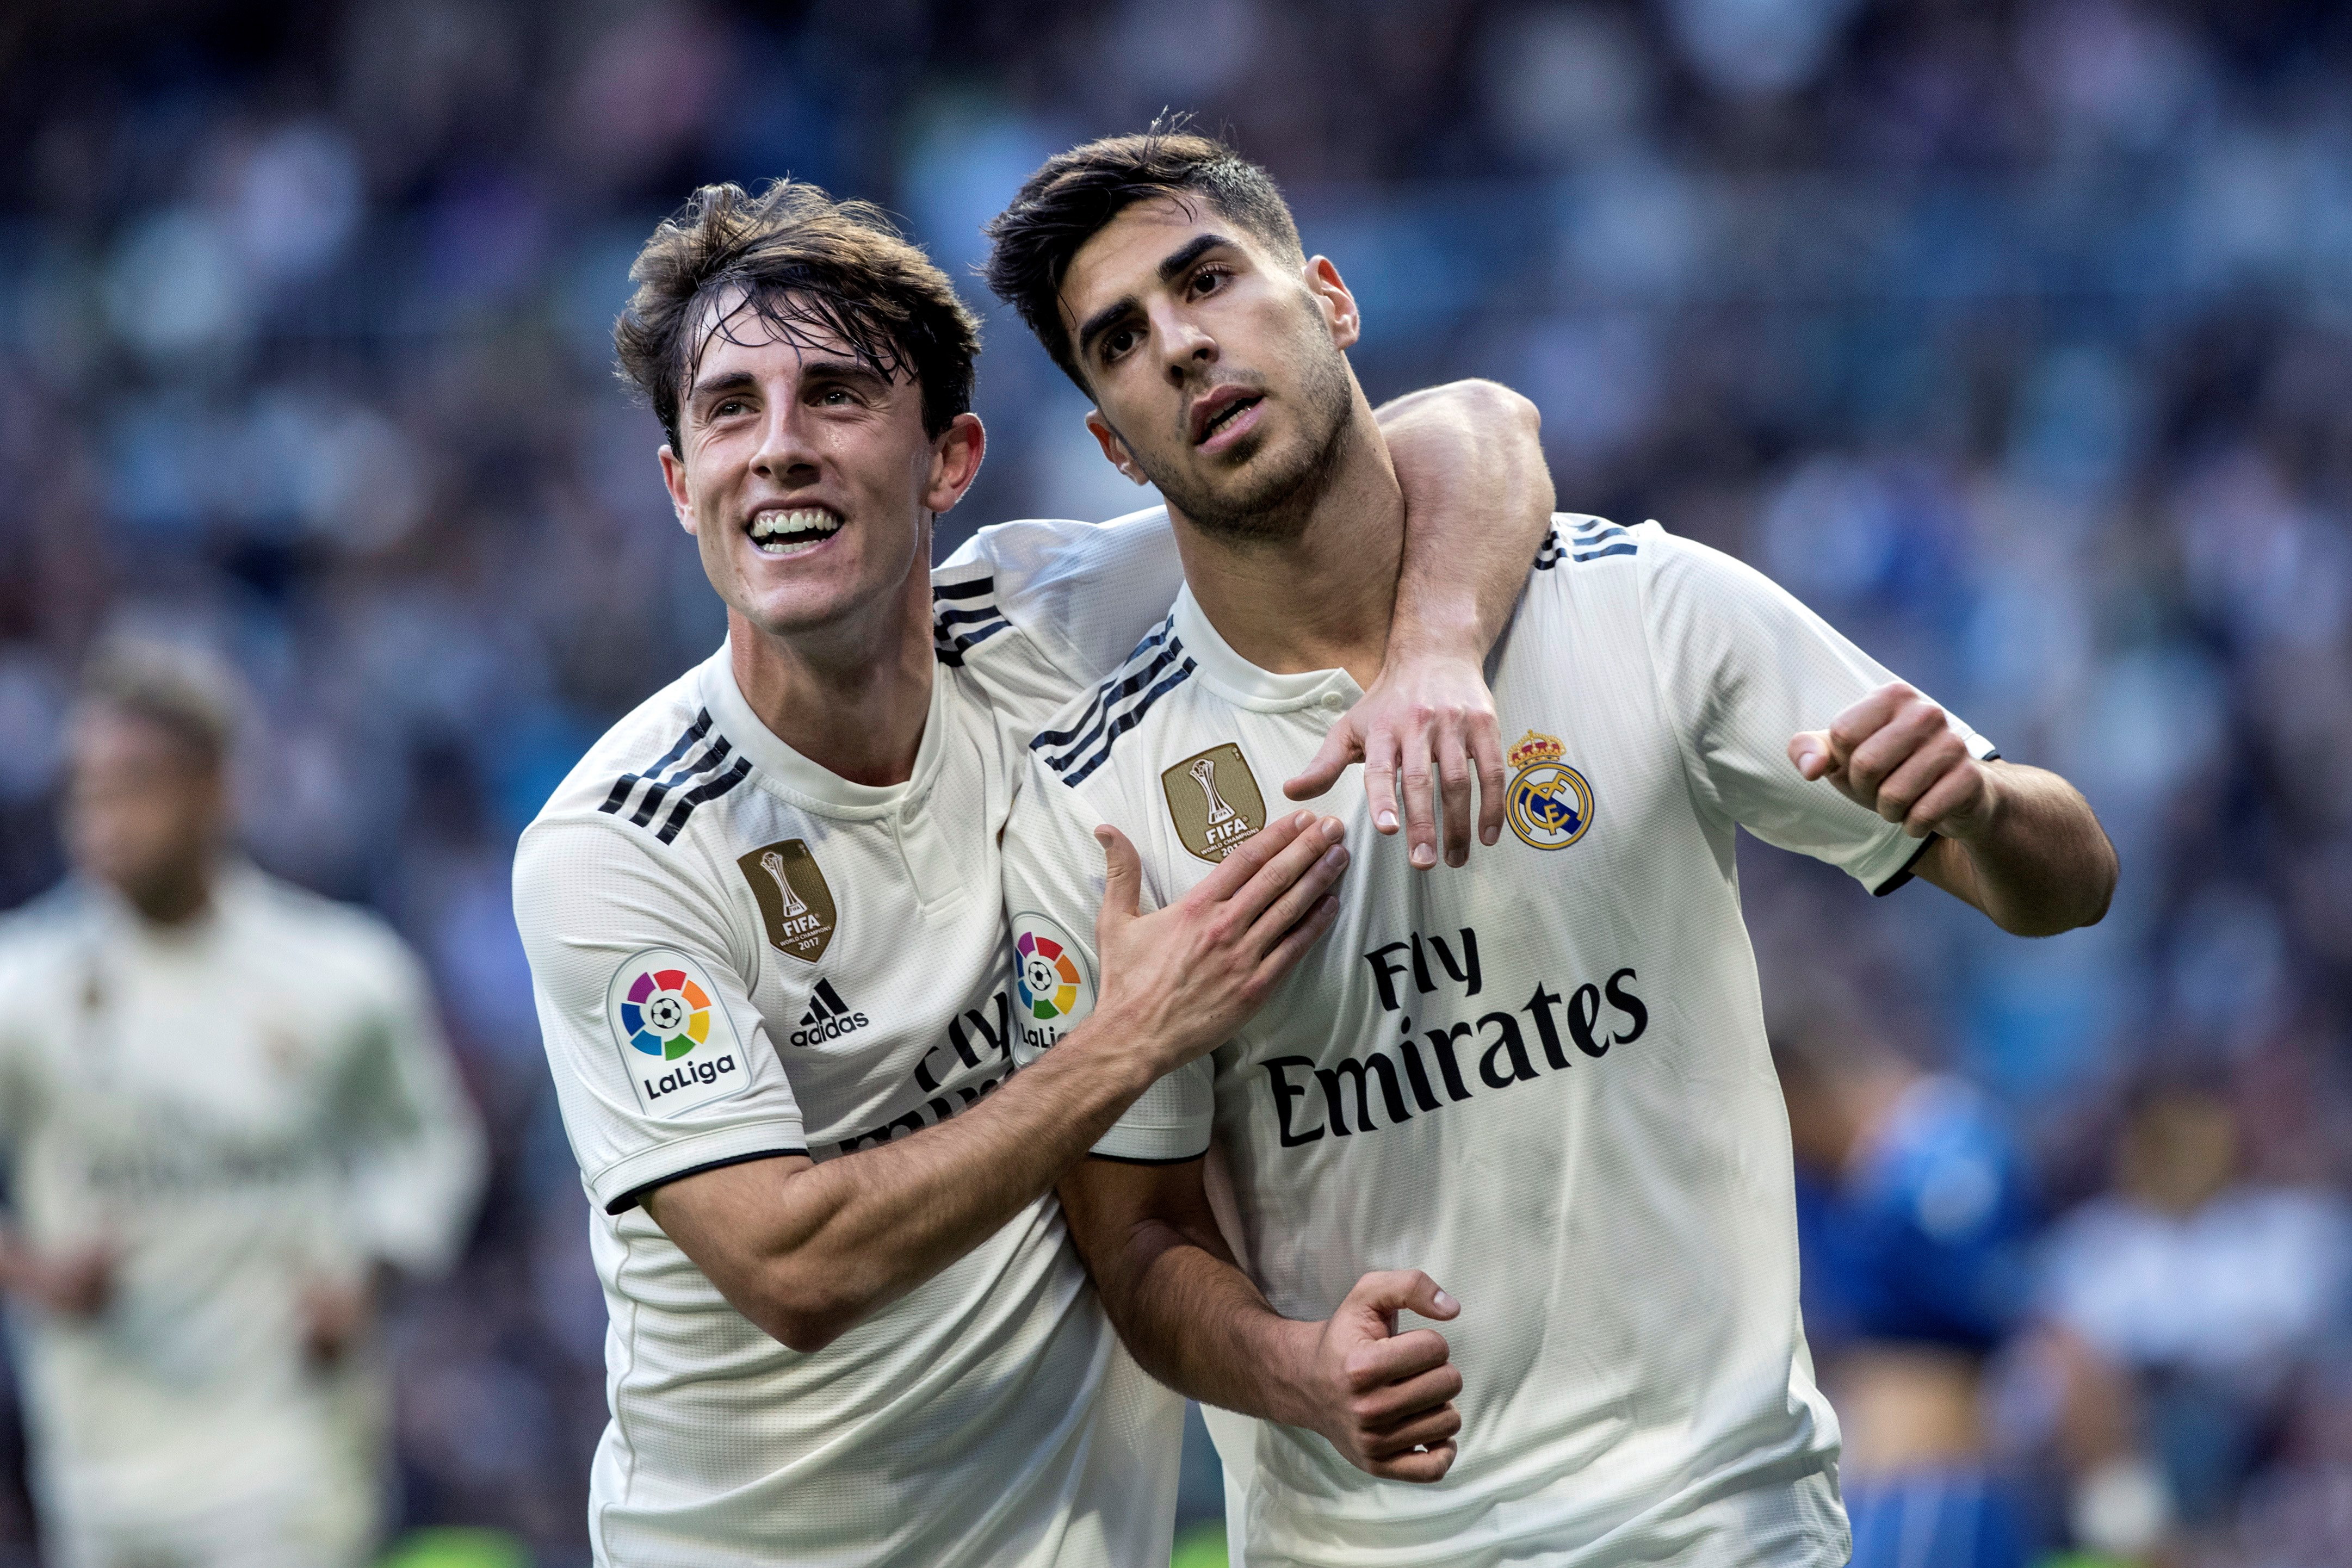 epa07212694 Real Madrid's midfielder Marco Asensio (R) celebrates with his teammate Alvaro Odriozola after scoring the 1-0 during a Spanish King's Cup round of 32 second leg match between Real Madrid and Melilla at the Santiago Bernabeu stadium, in Madrid, Spain, 06 December 2018.  EPA/Rodrigo Jimenez